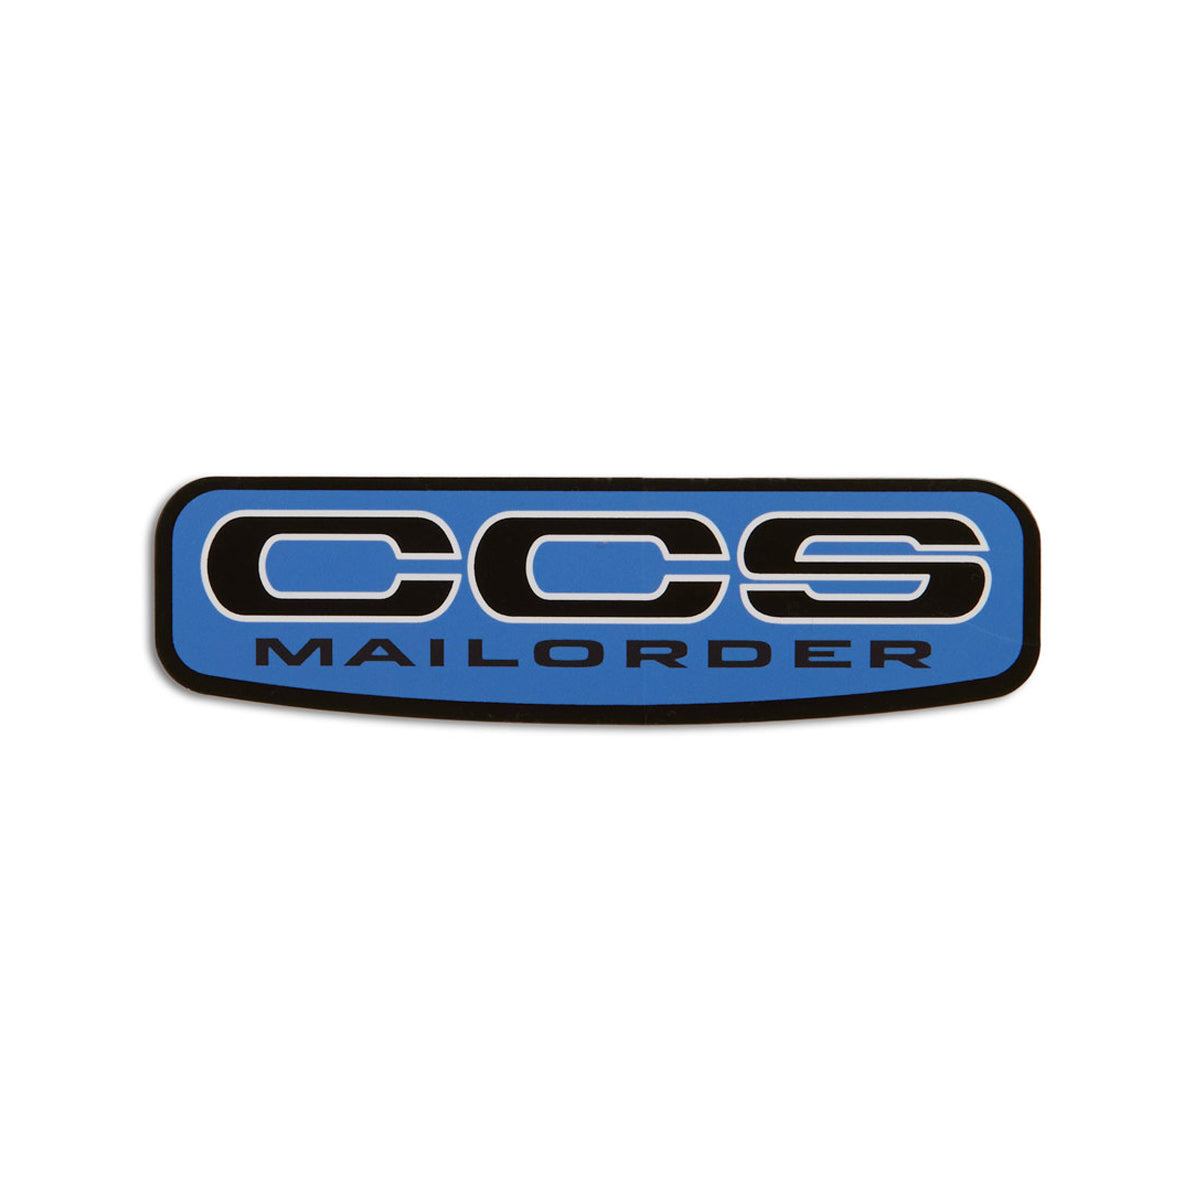 CCS Mailorder Logo Stickers - Blue/White/Black image 1